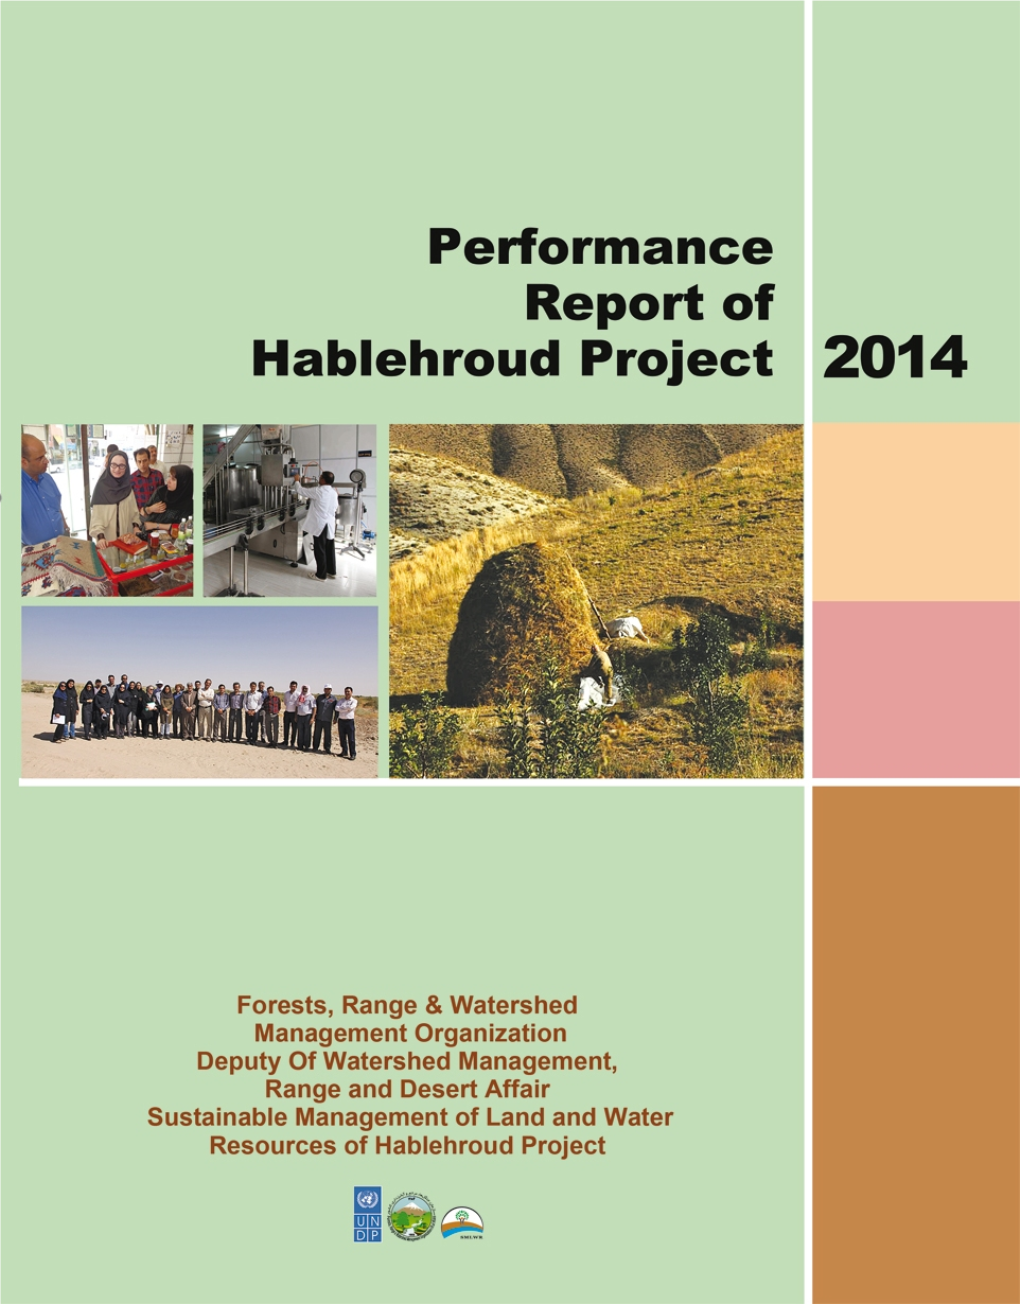 Performance Report of Hablehroud Project- 2014